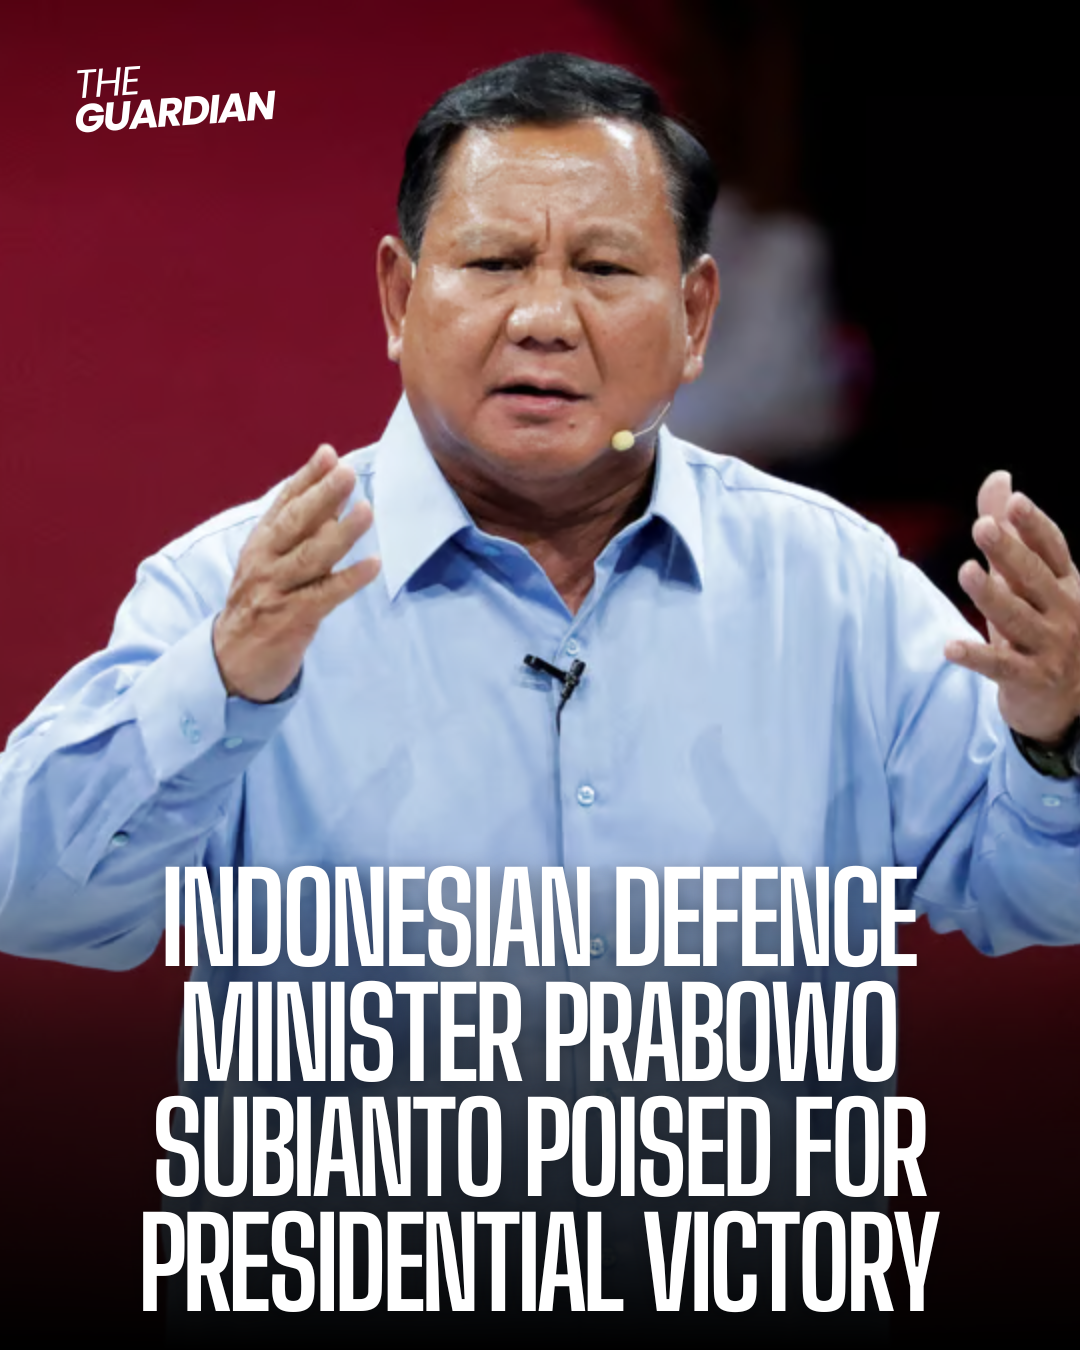 According to a survey, Minister Prabowo Subianto is on track to win the country's presidential election with more than 50% of the vote.